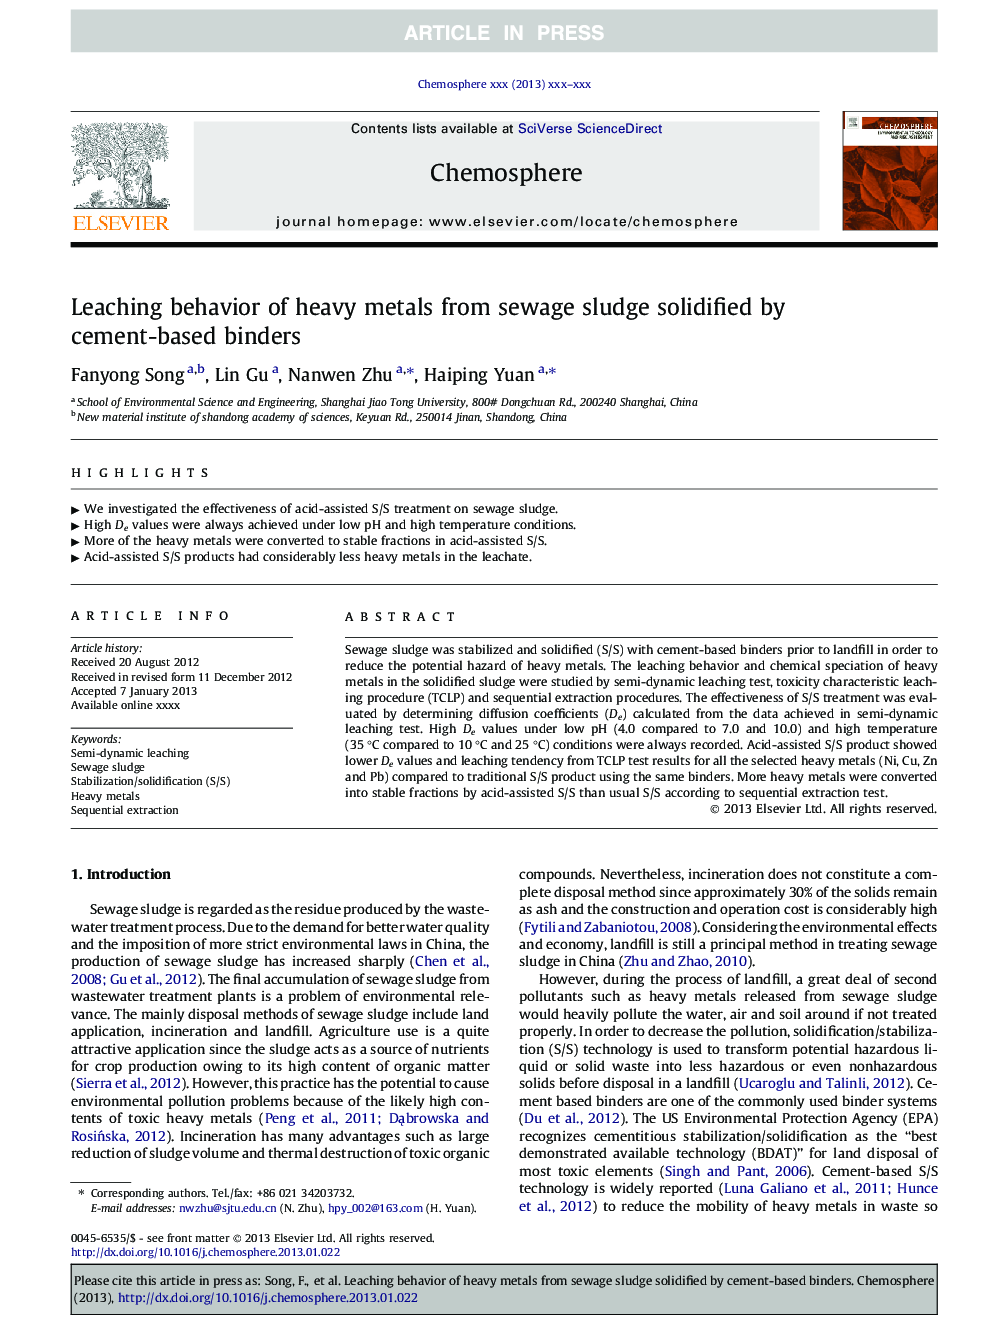 Leaching behavior of heavy metals from sewage sludge solidified by cement-based binders